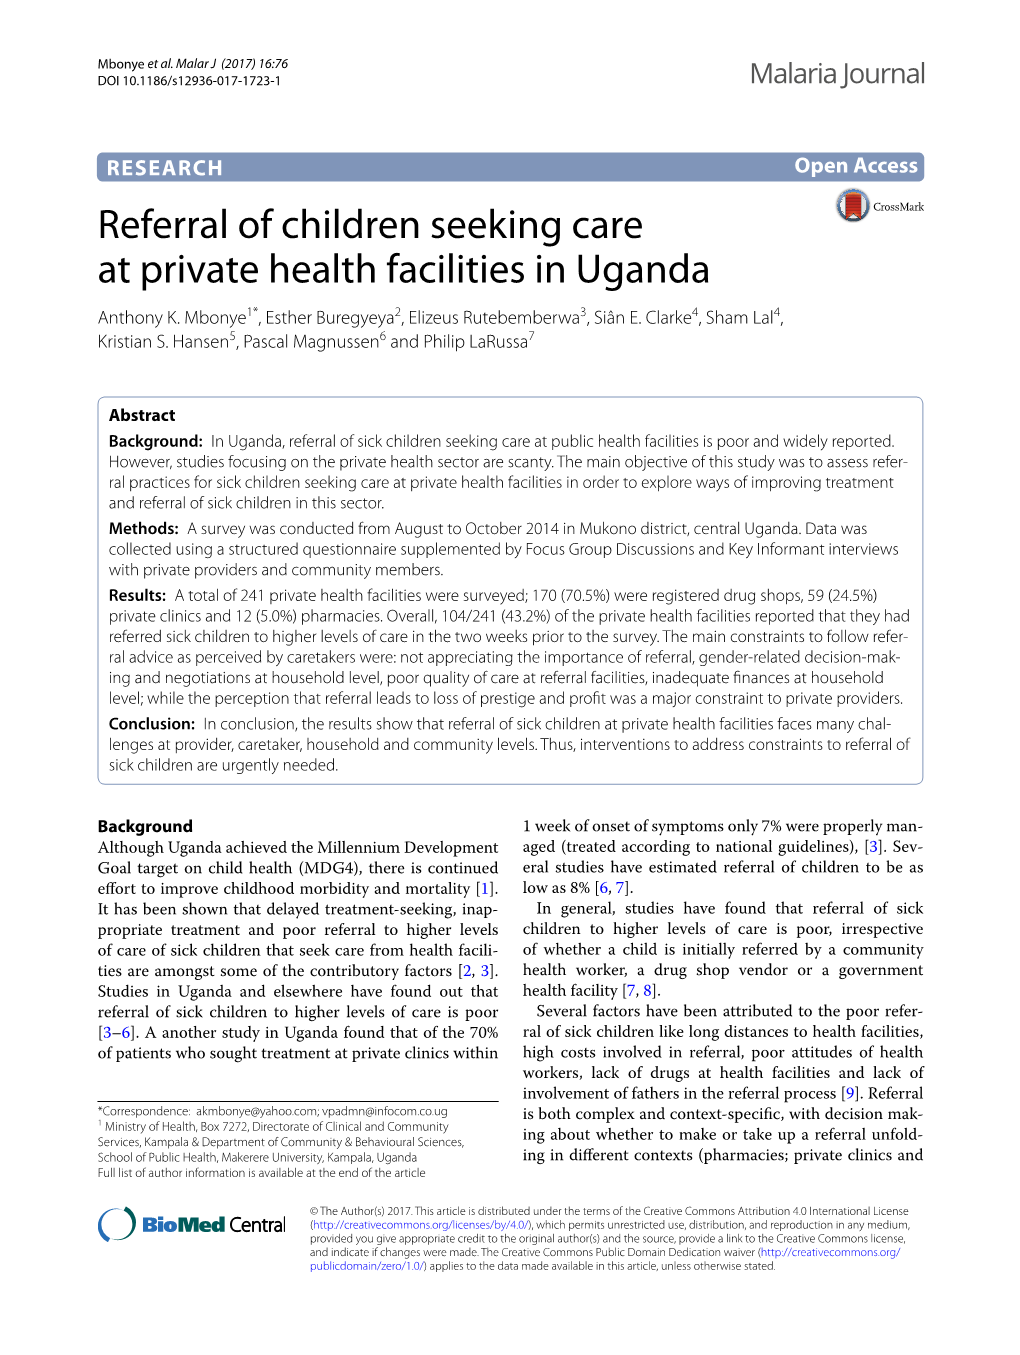 Referral of Children Seeking Care at Private Health Facilities in Uganda Anthony K